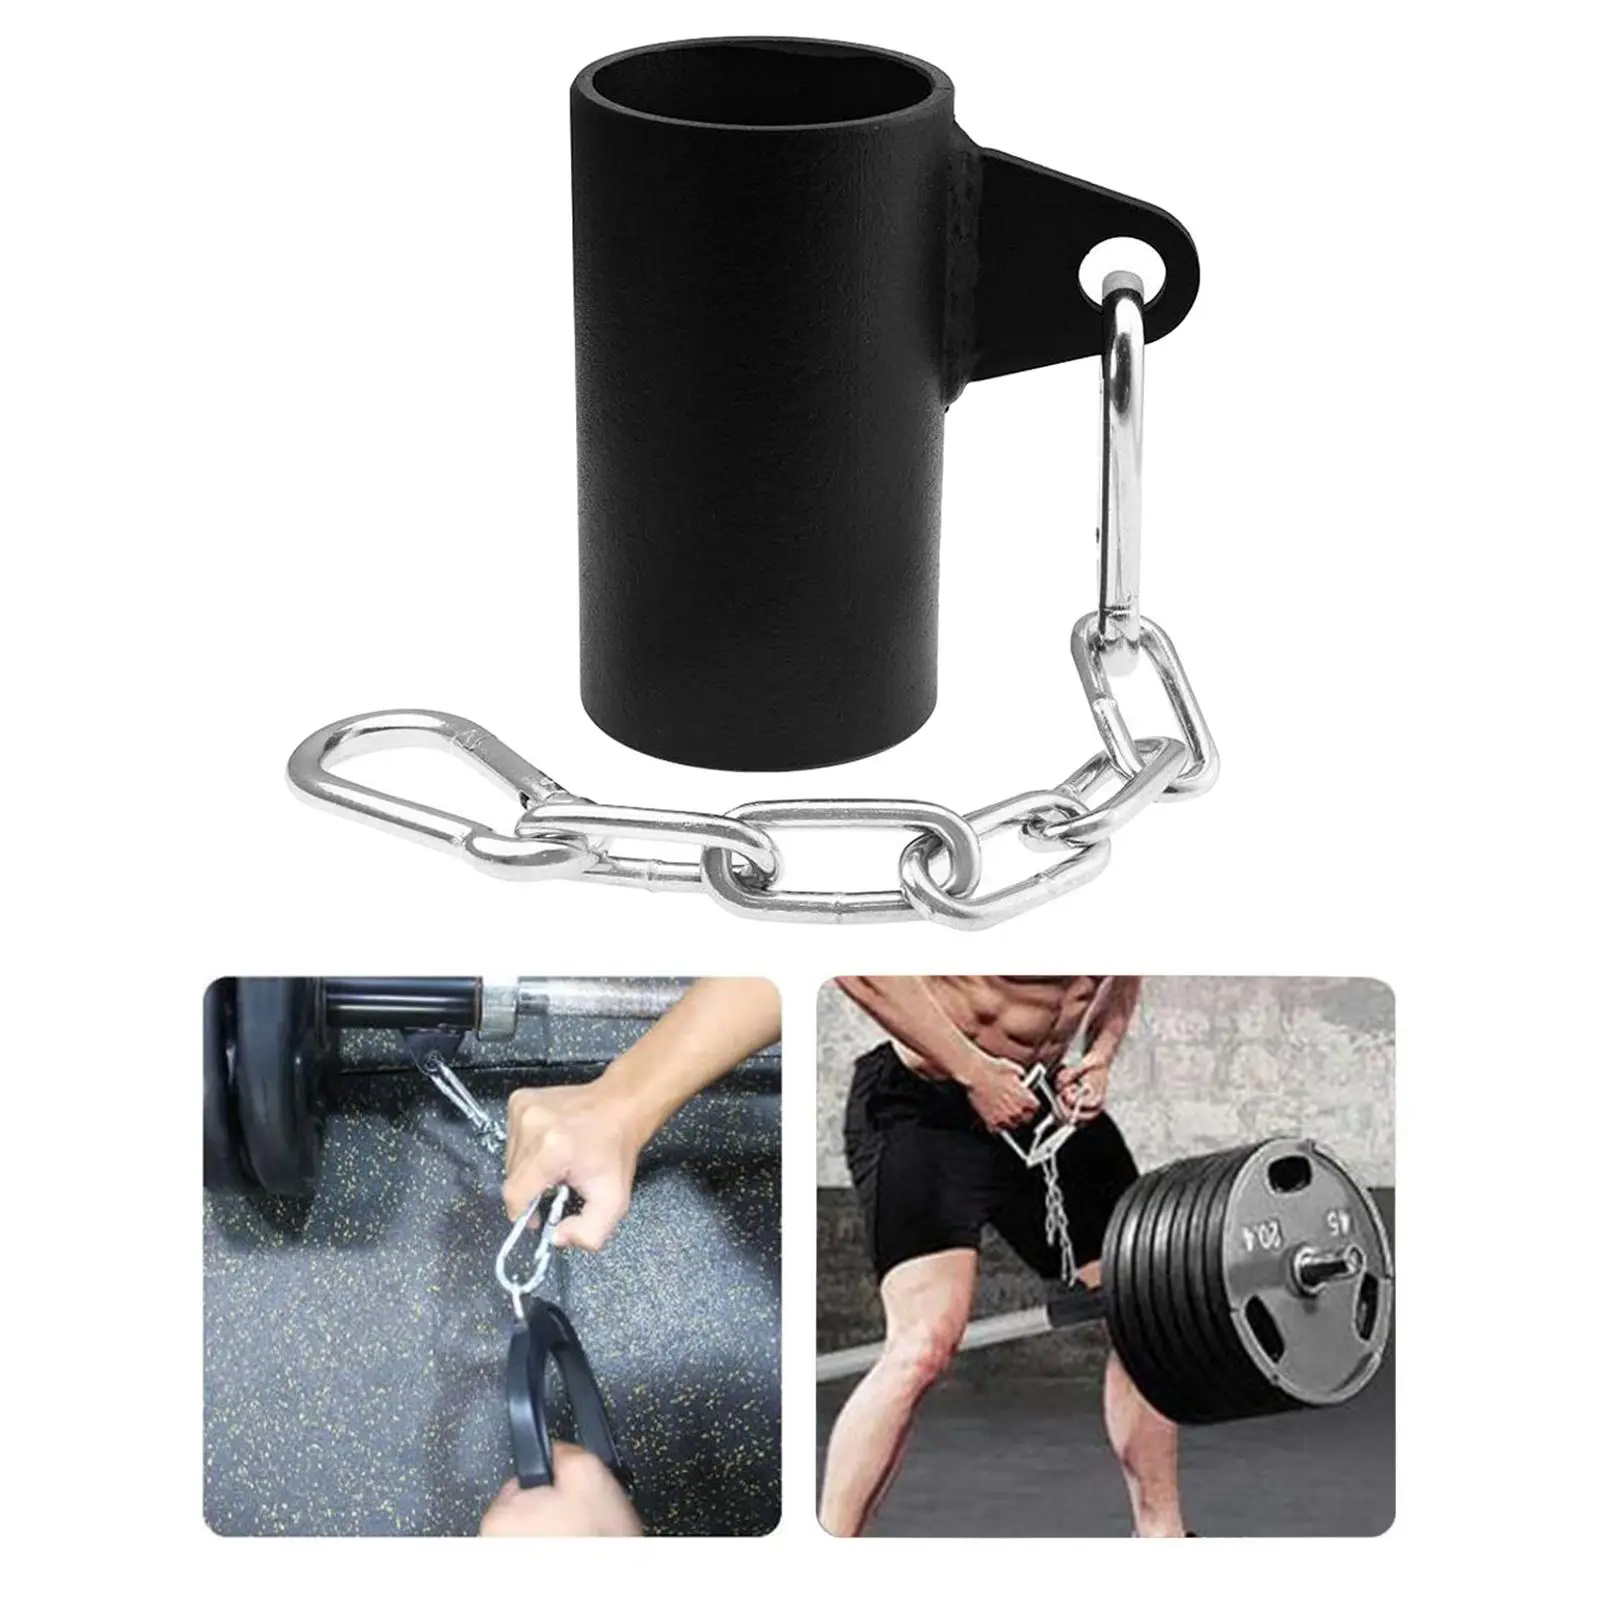 Lightweight T Bars Row Platform with Chain Barbell Bar Eyelet Attachment Post